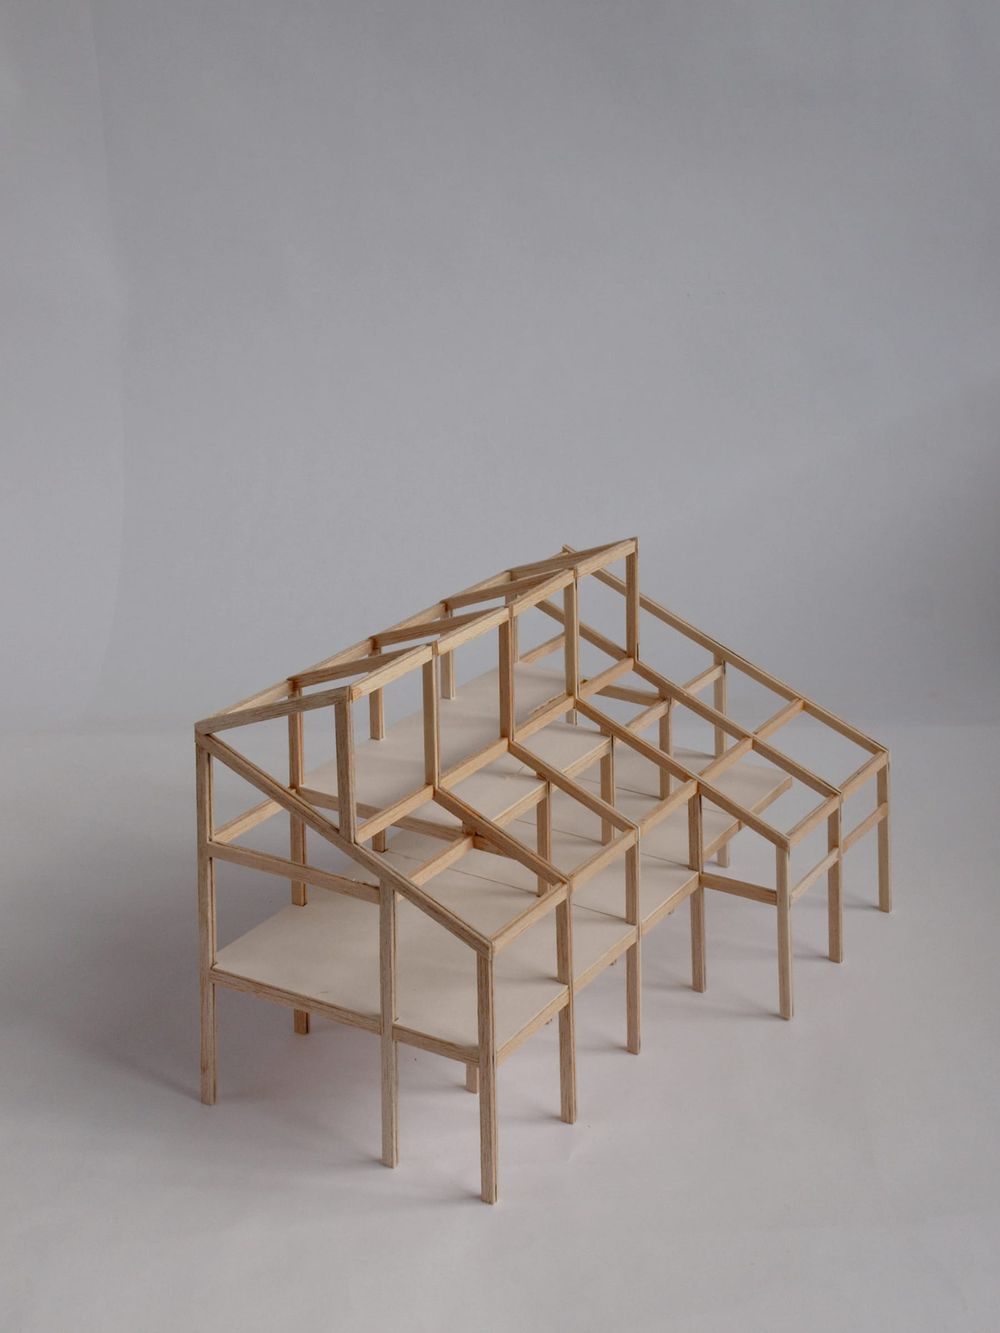 Scale structural model of the proposed office and workspace on Claylands Avenue designed by From Works.